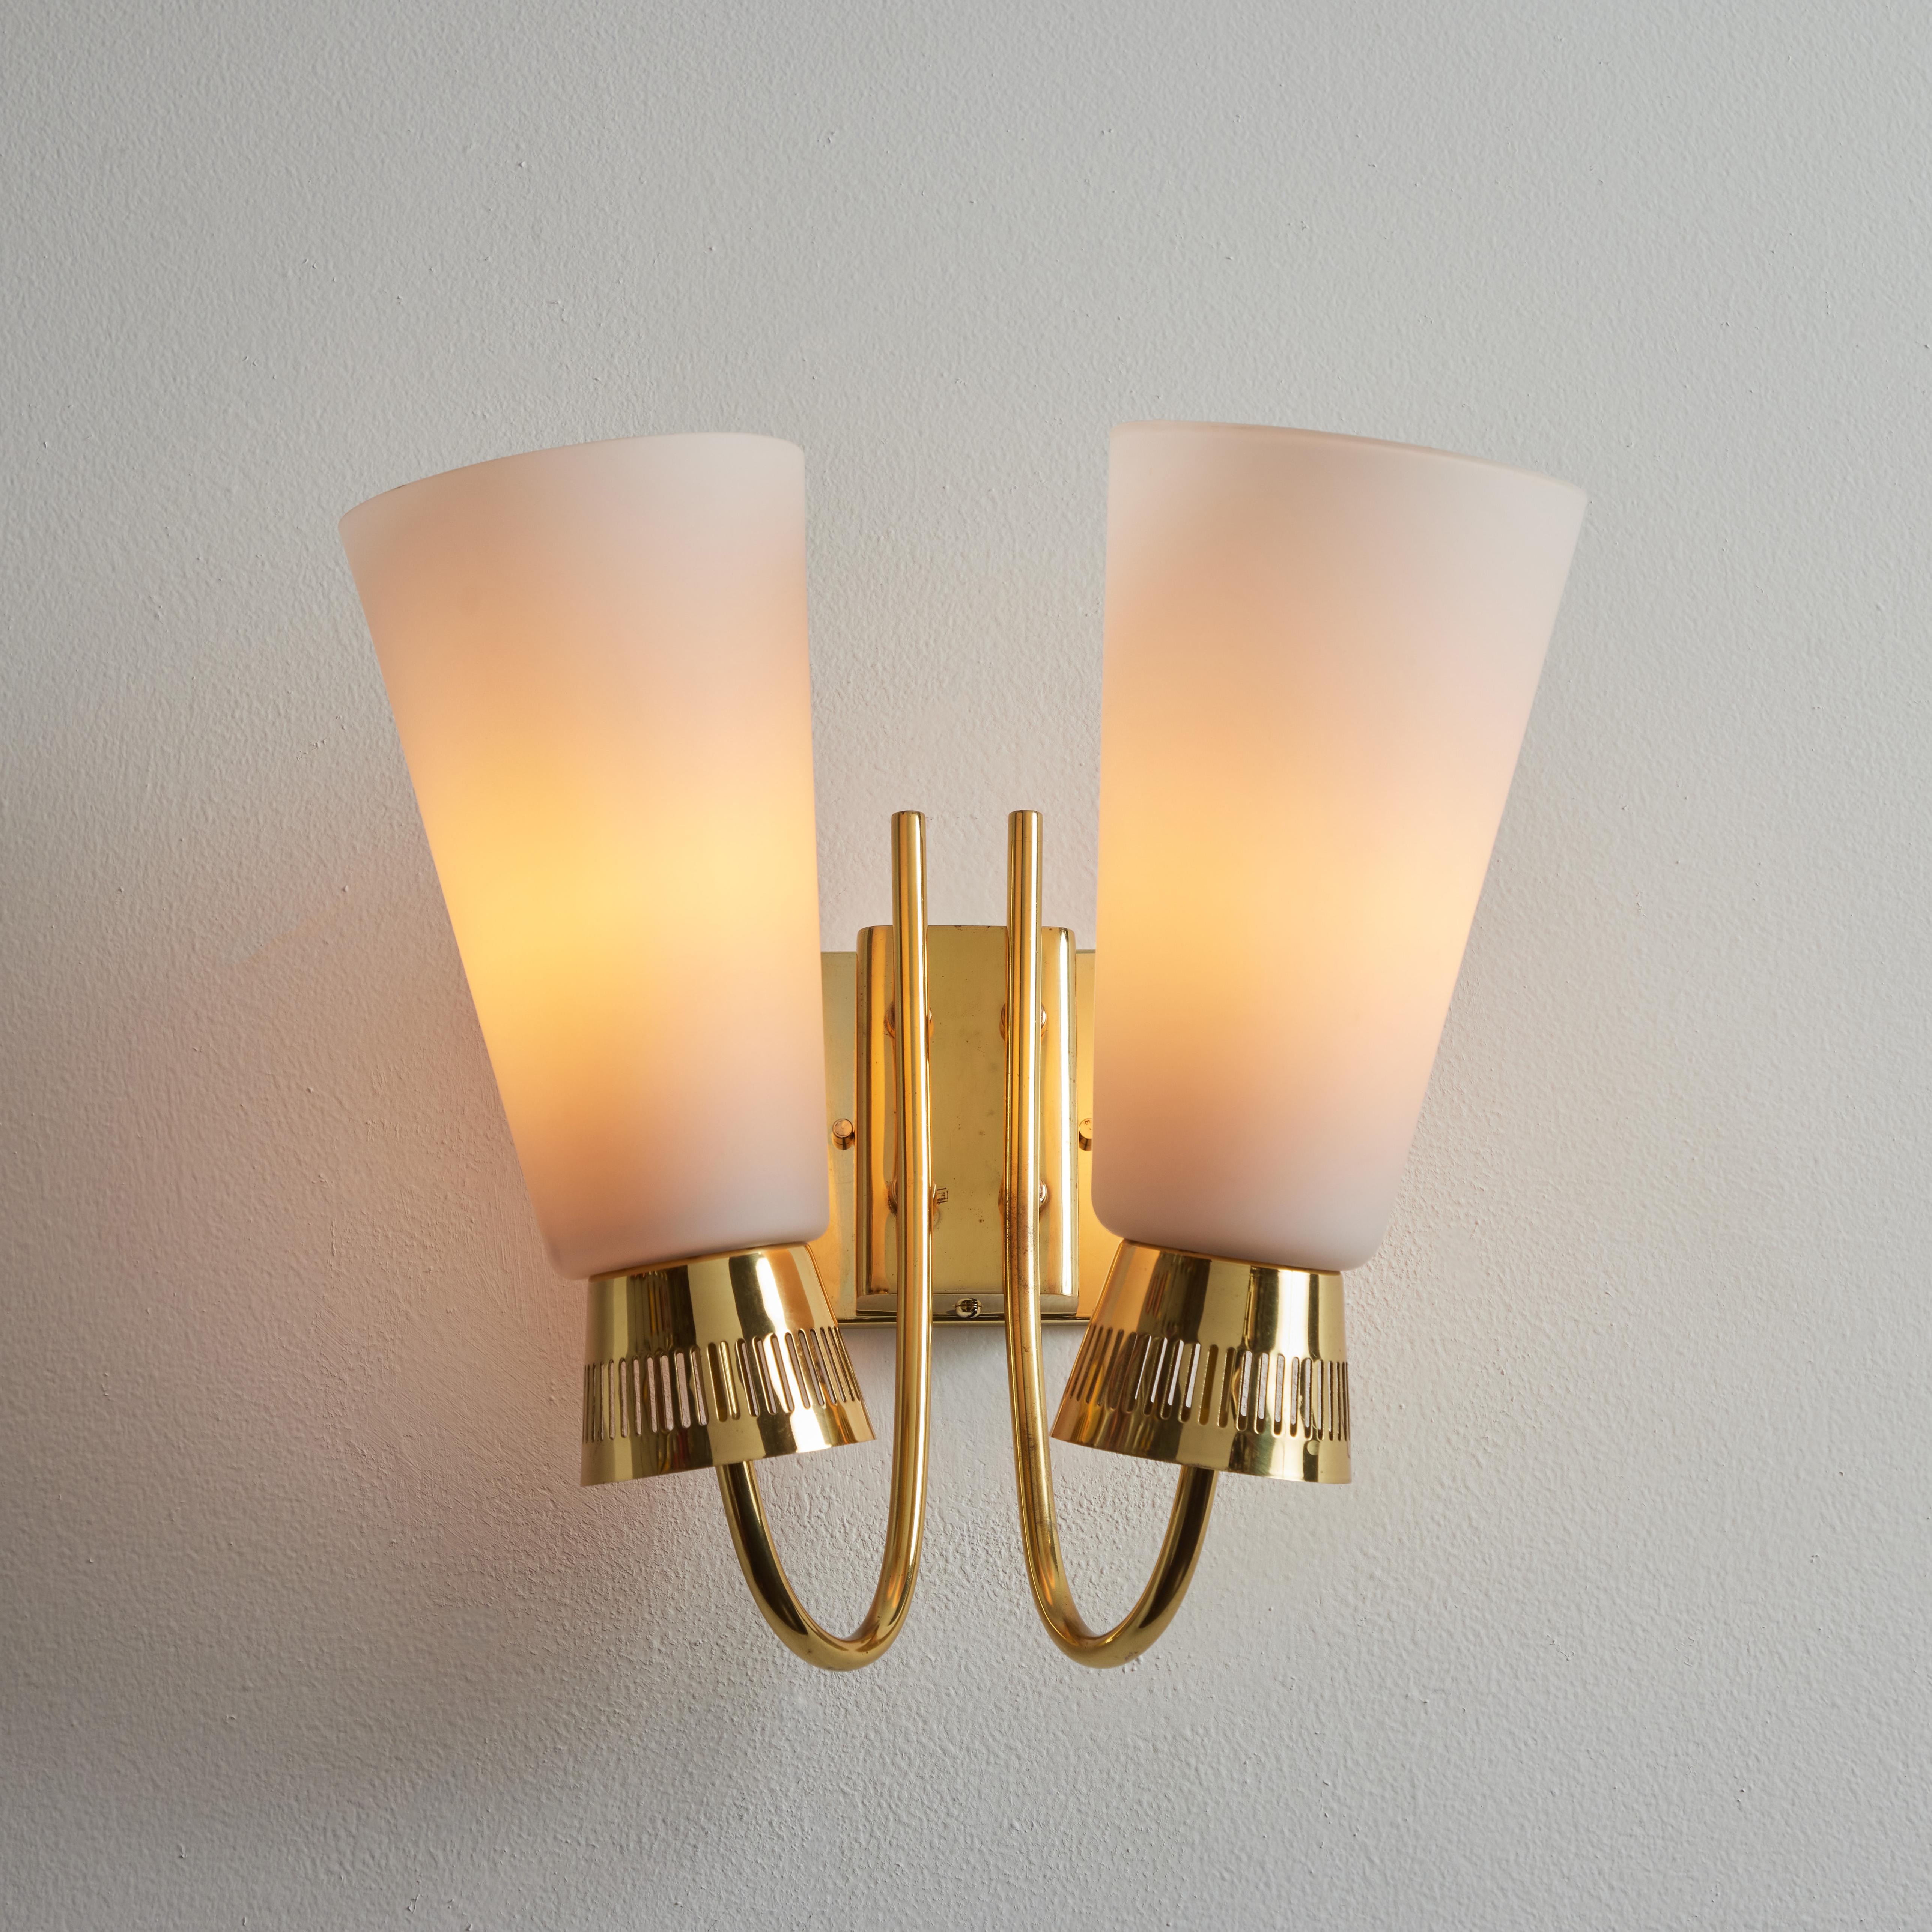 Pair of 1950s Mauri Almari Model #EY60 Brass & Glass Double Sconces for Itsu In Good Condition For Sale In Glendale, CA